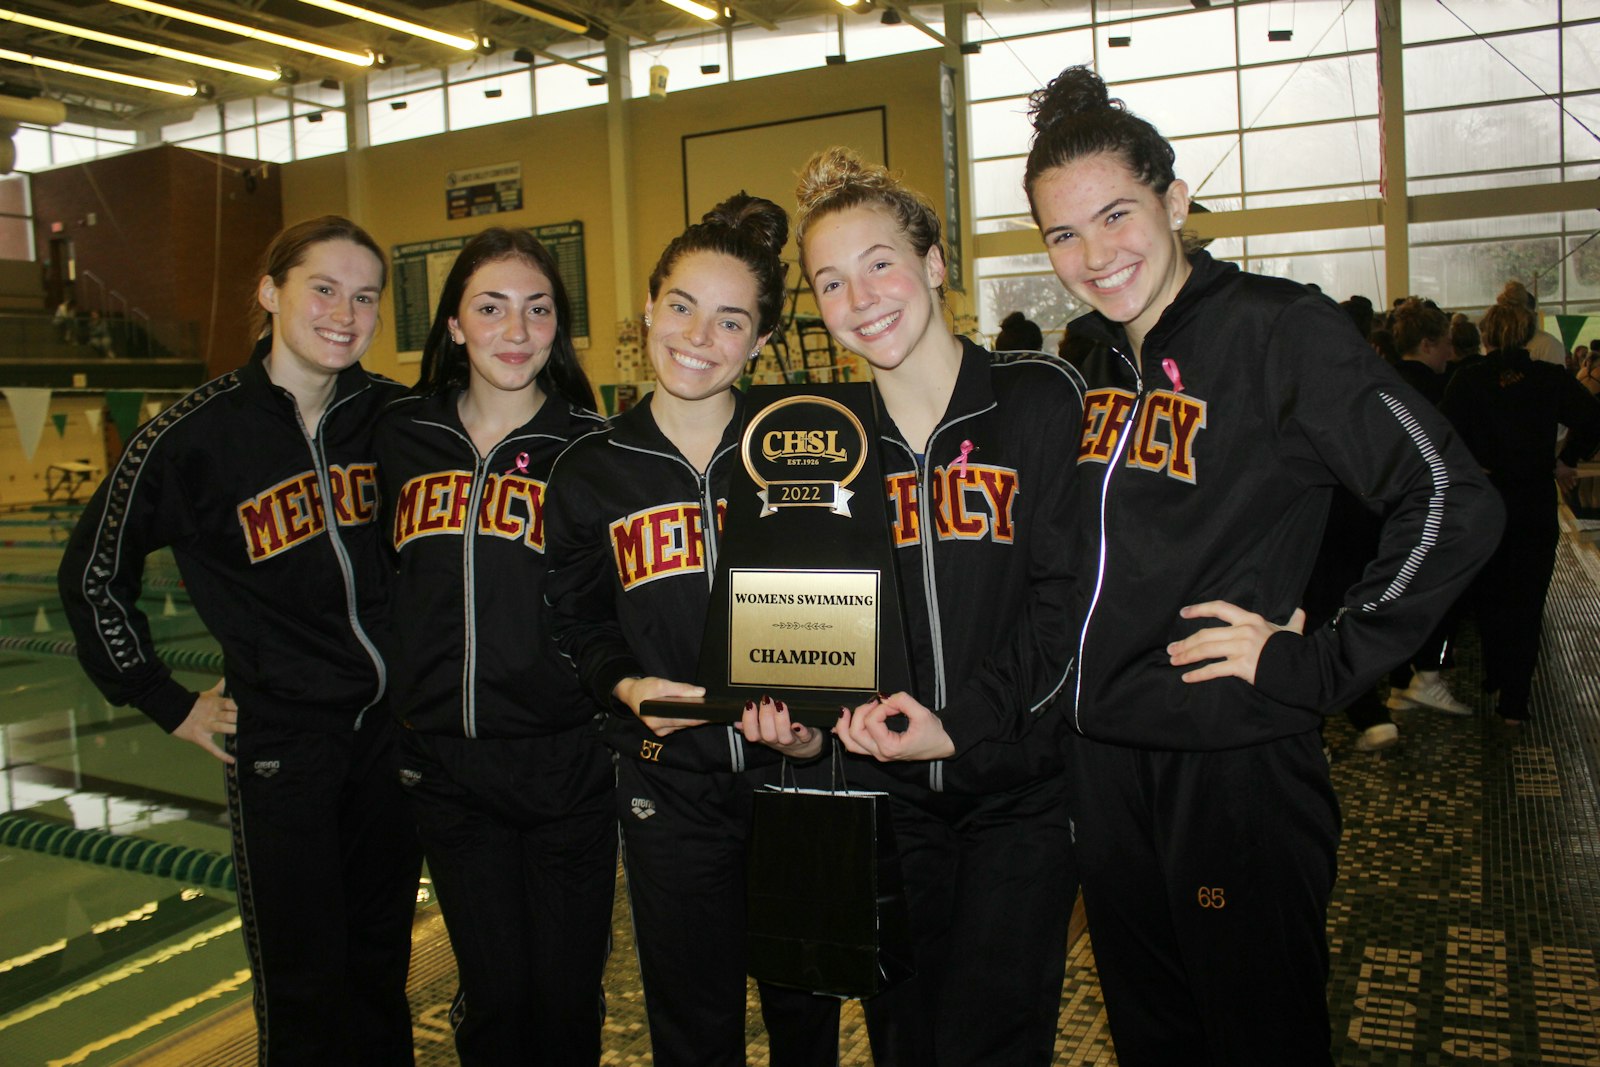 Farmington Hills Mercy swimming and diving team captains Grace Roberts, Bella D’Orazio, Elizabeth Bayer, Alexis Conway and Sydney Derkervorkian hoist yet another Catholic League championship trophy. The Marlins have won the league meet every season since 1991.